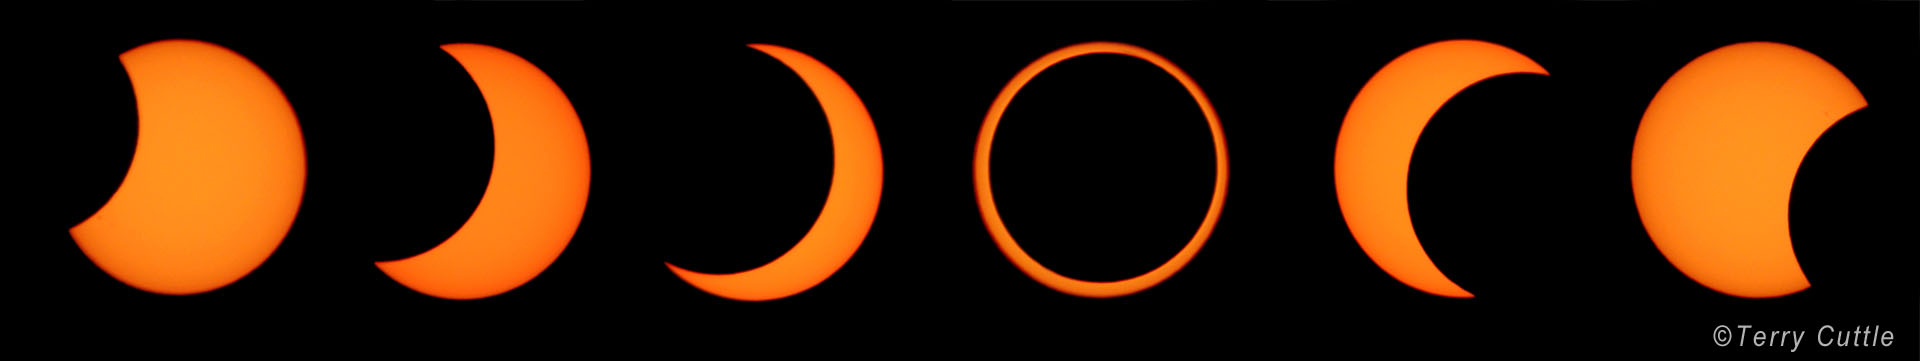 The photo consists of six images showing the phases of the annular eclipse in sequence. The first three images show the partial phase with increasing coverage of the Sun by the Moon. The fourth image shows the Moon in front of the Sun leaving a ring of sunlight surrounding the Moon. The last two images show the final partial phases with the Moon progressively moving off from in front of the Sun.